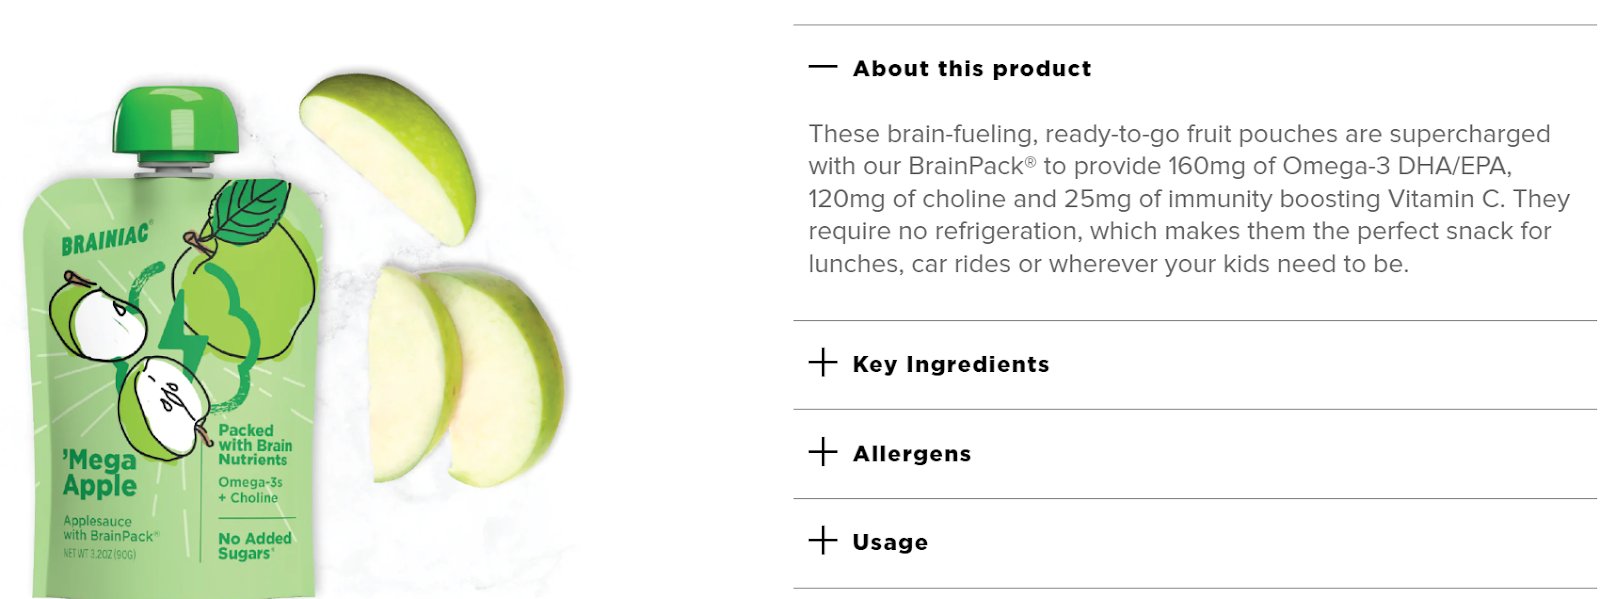 “About this product”—describes omega-3, choline, and vitamin C content